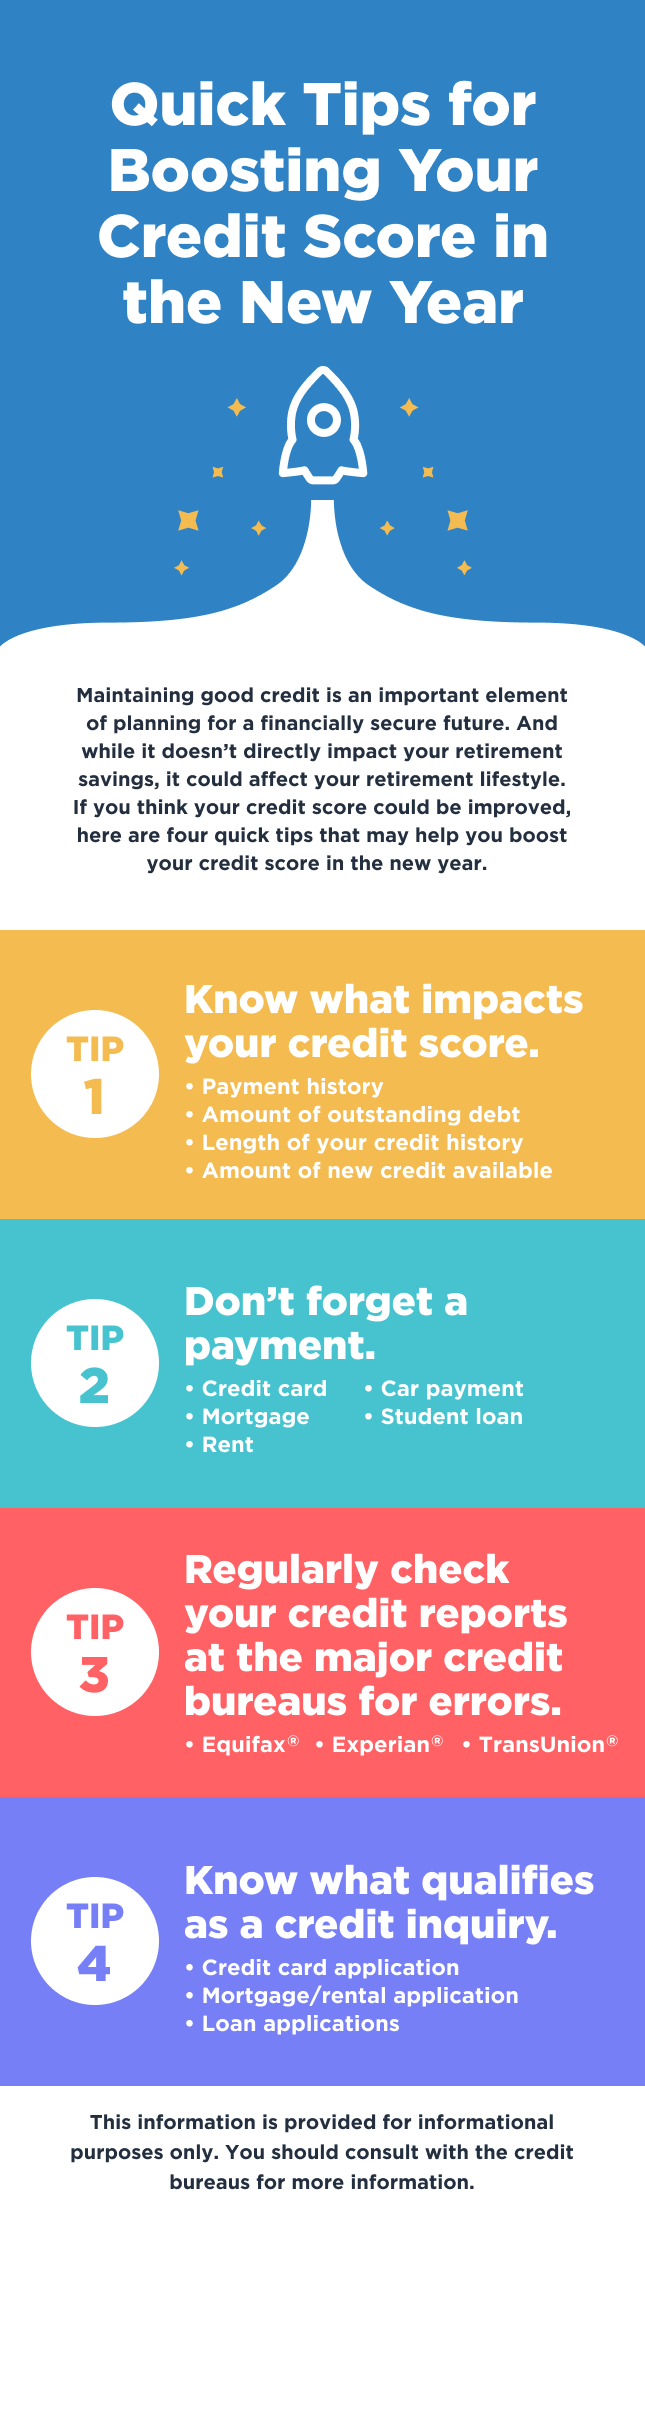 An infographic with recommendations on how to boost your credit score